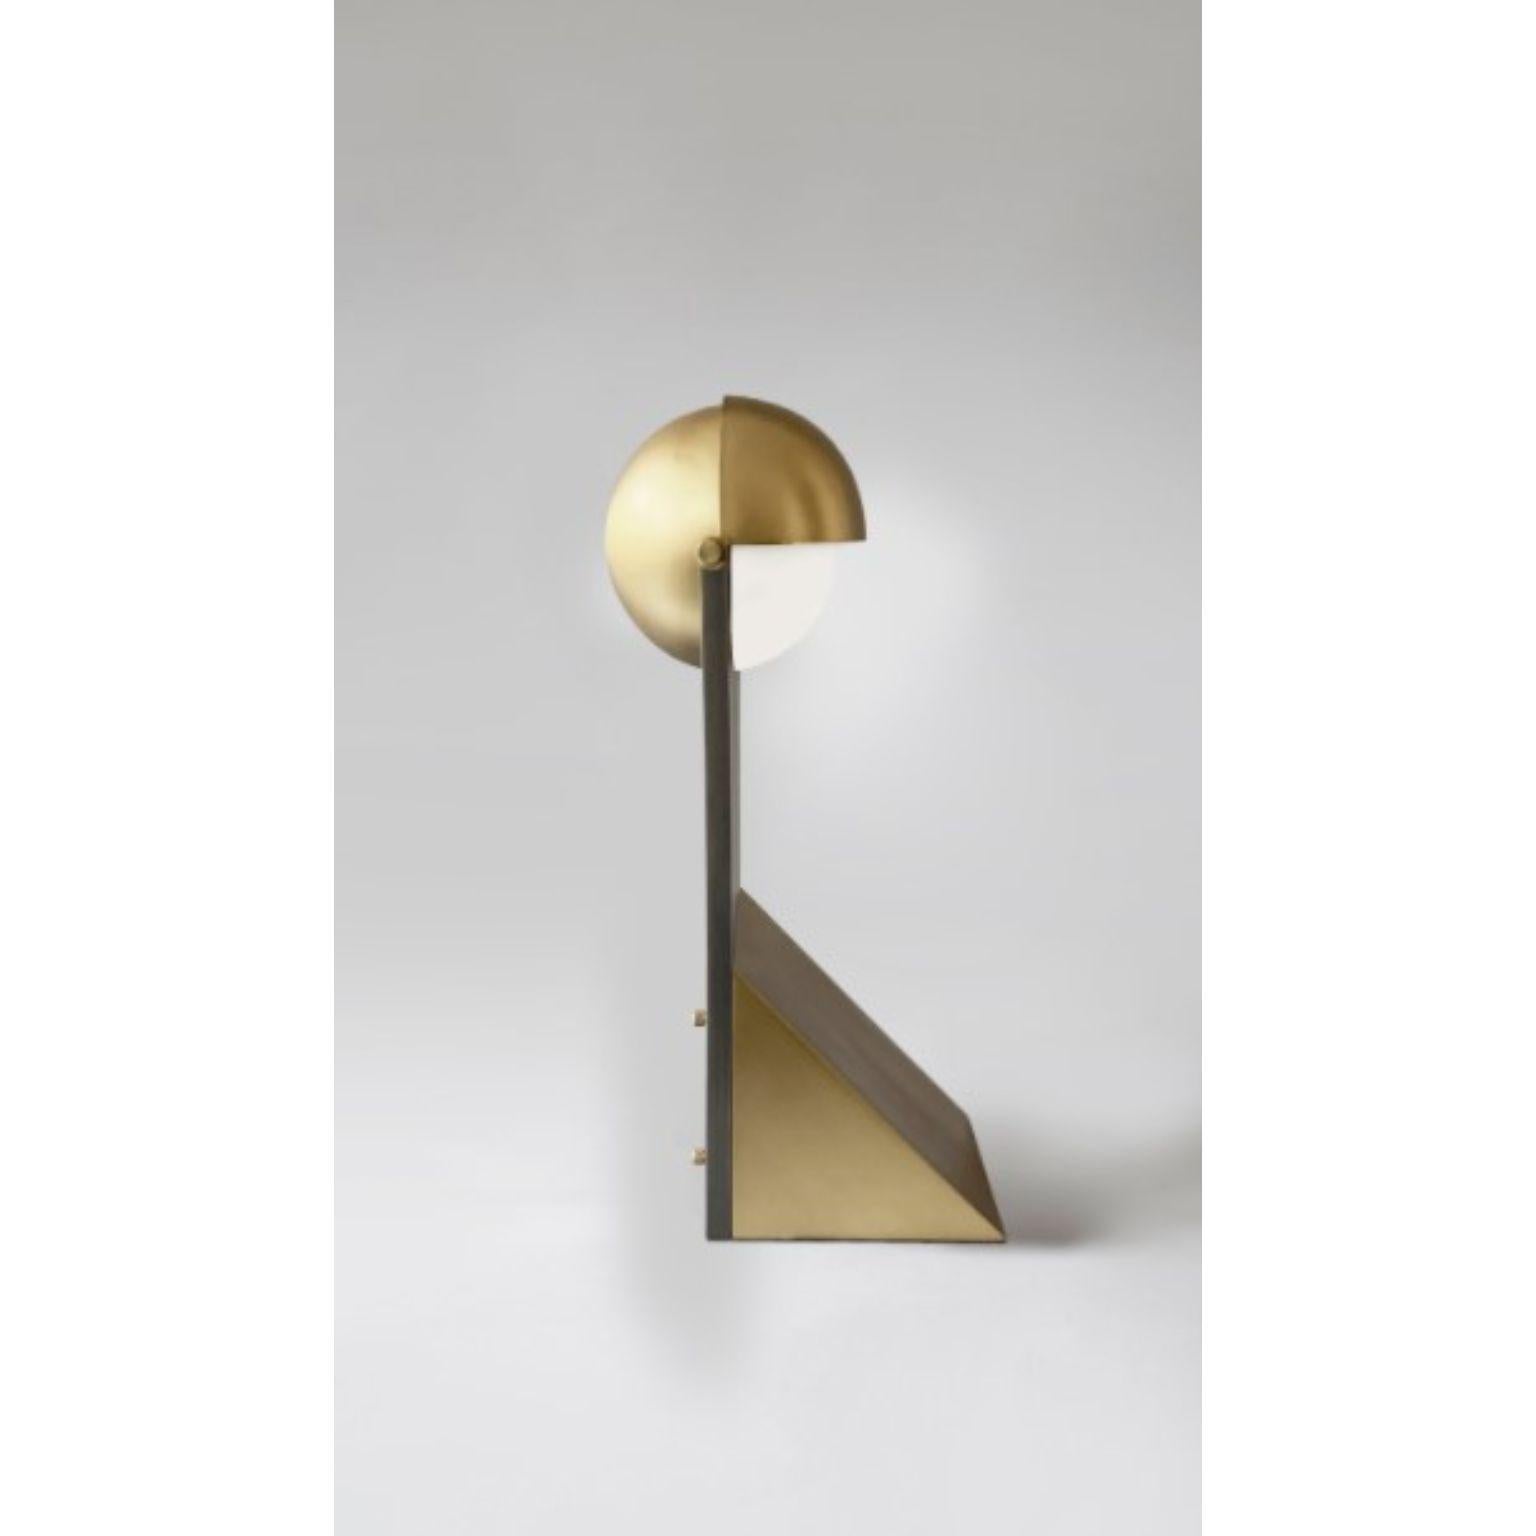 Brass Dance of Geometry table lamp by Square in Circle
Dimensions: H48 x W14 x D18 cm
Materials: Brushed brass, Brushe grey metal

Inspired by costumes from The Bauhaus Ballet, this triadic table lamp design utilizes the three essential